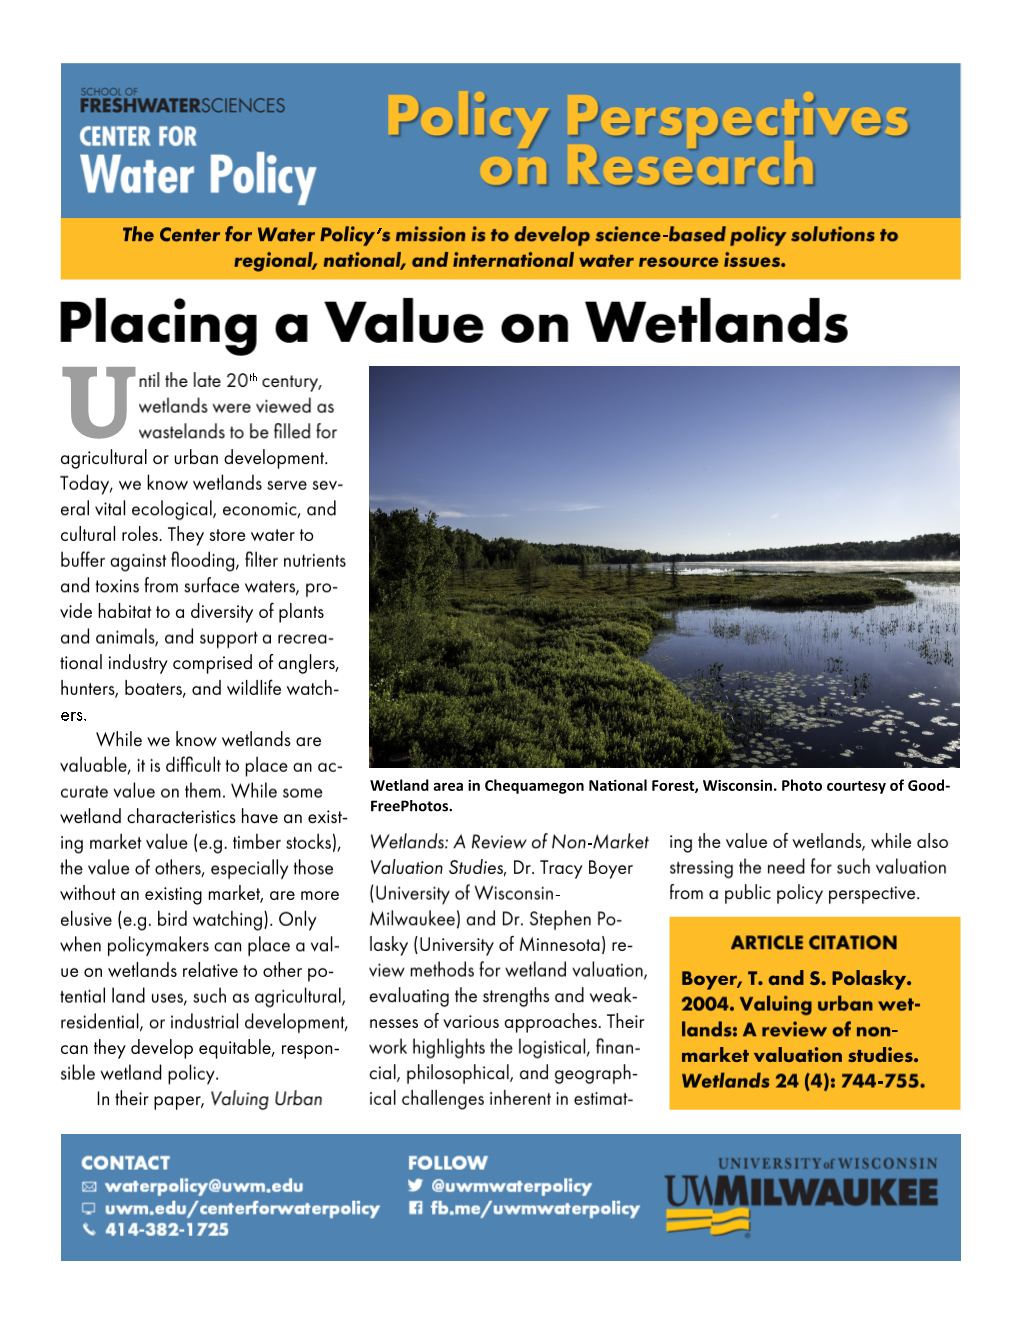 Valuing Urban Wetlands: a Review of Non-Market Valuation Studies